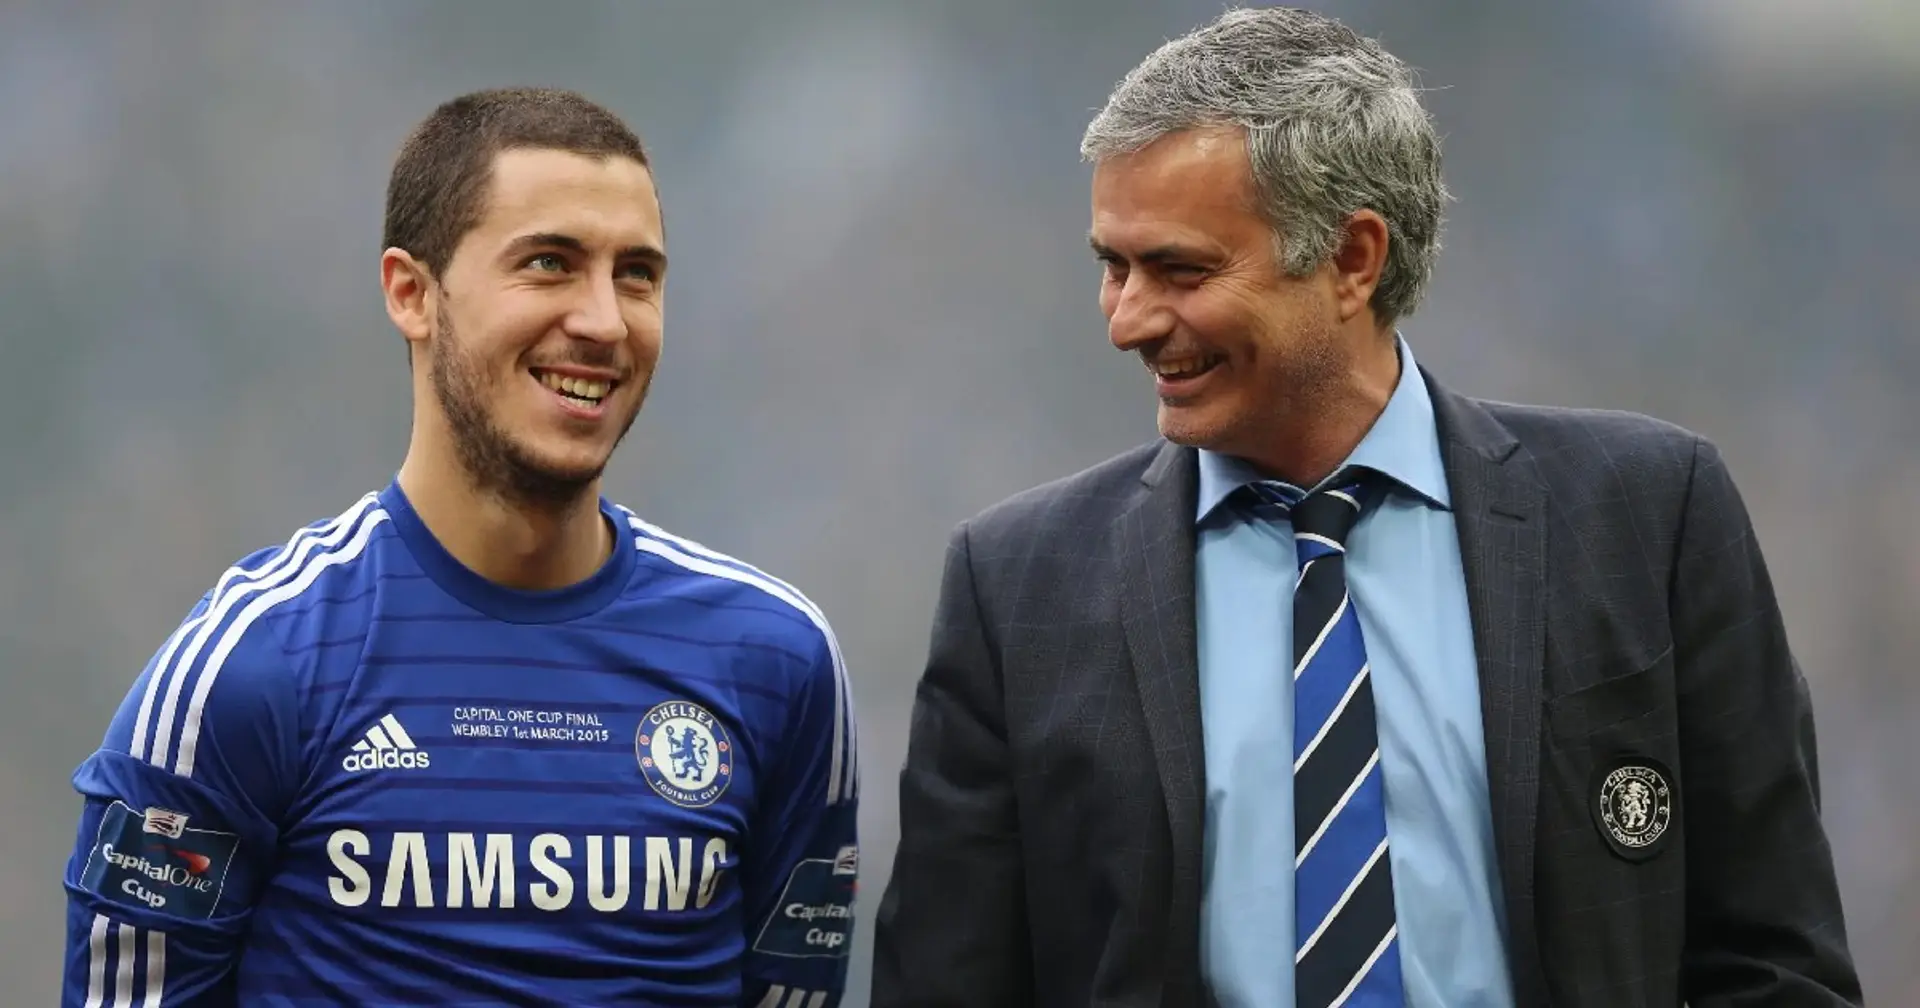 'One day we won't have Eden': Mourinho's comment about Hazard from 2015 rings true as he retires aged 32